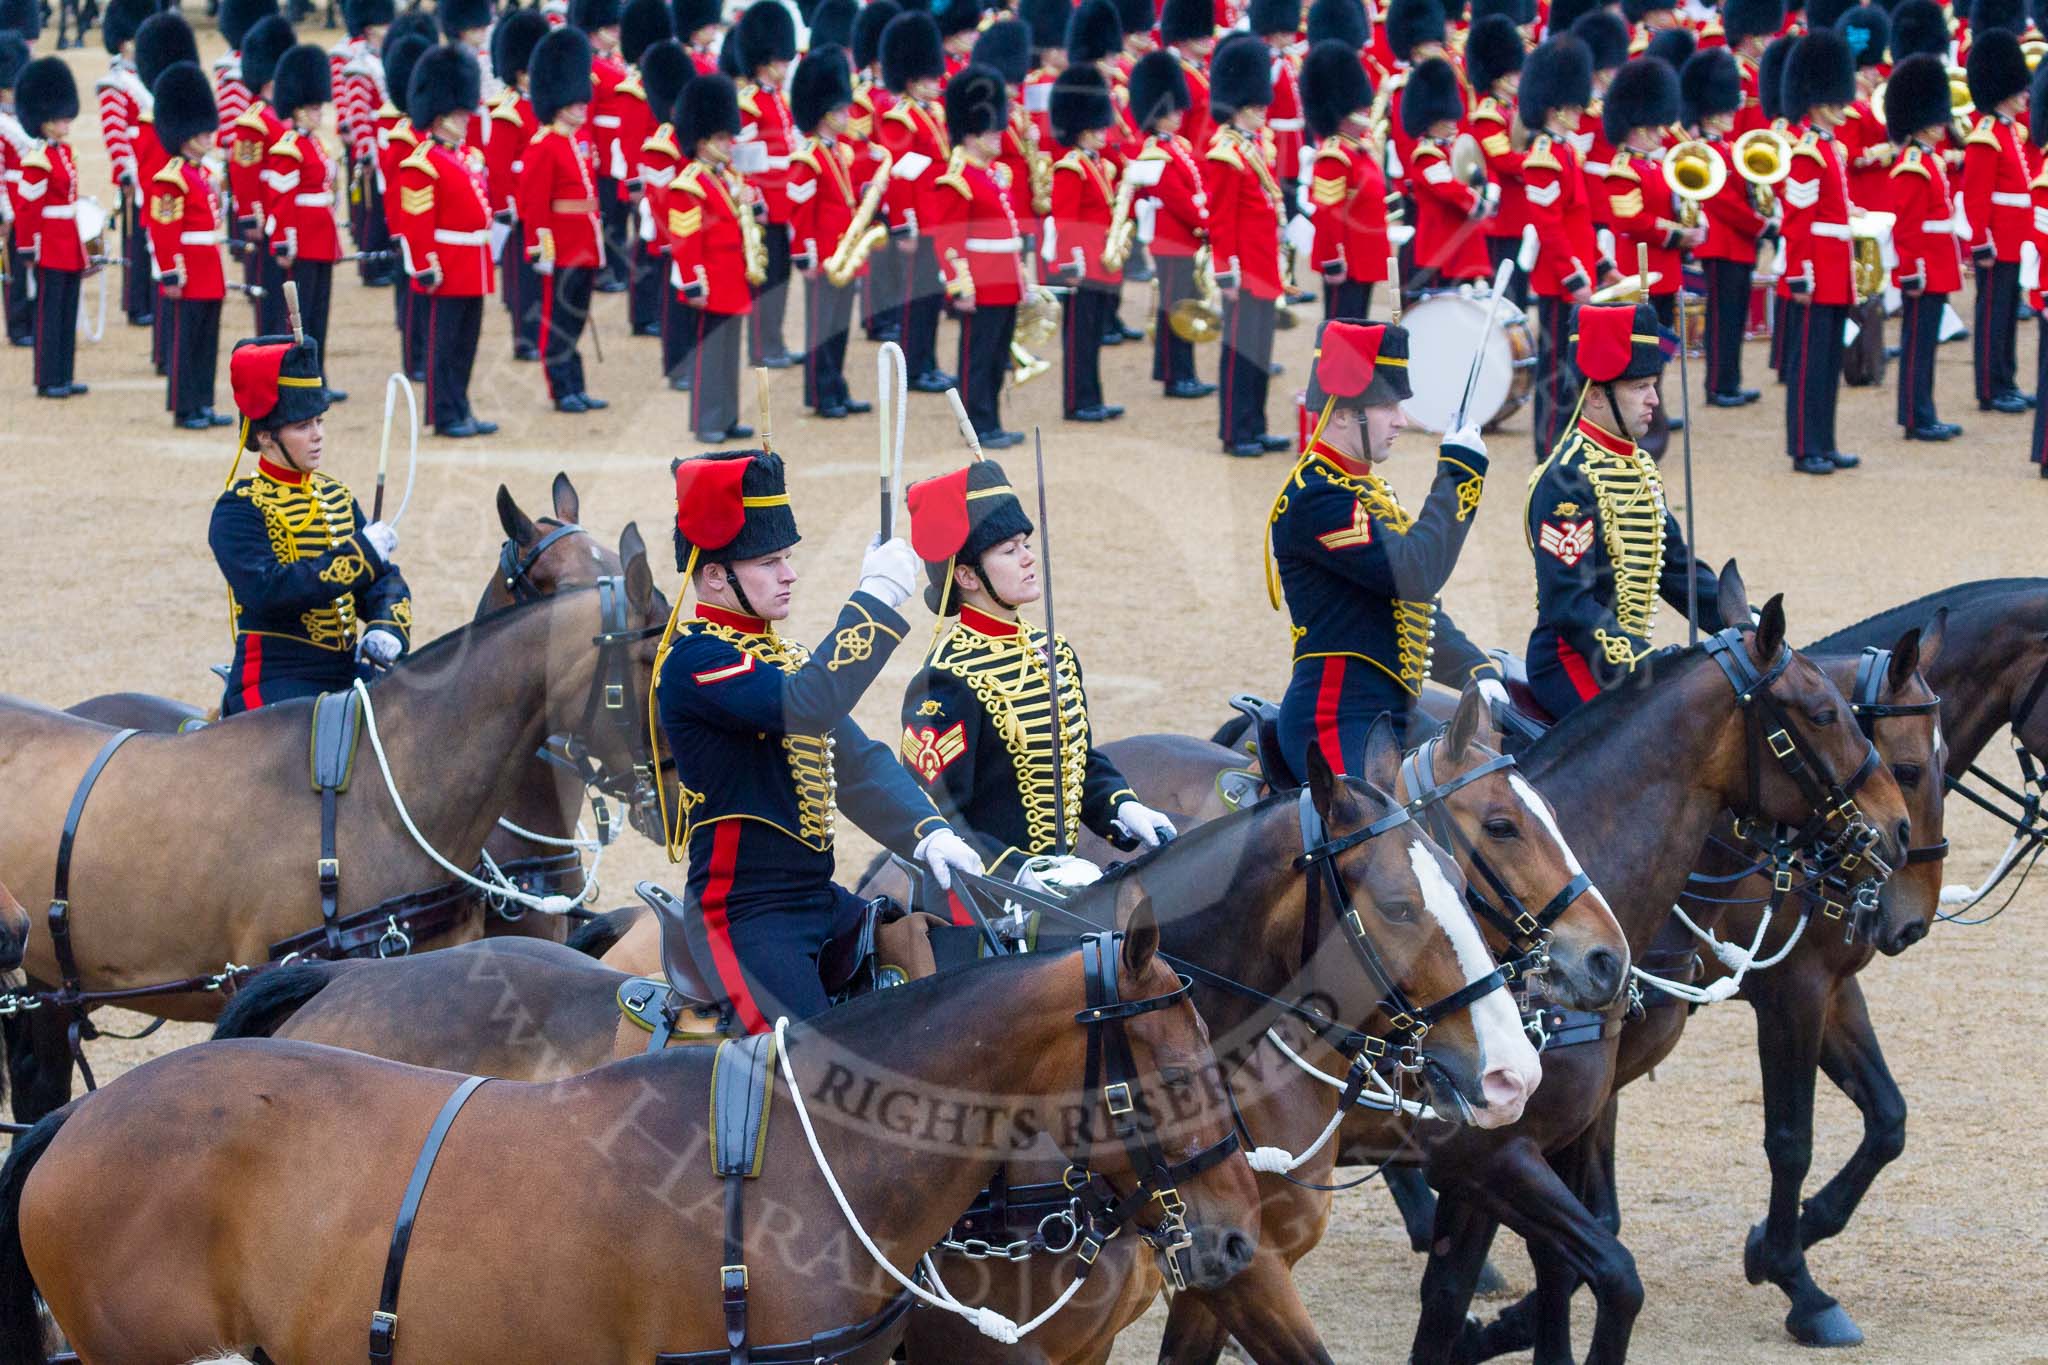 Trooping the Colour 2015. Image #540, 13 June 2015 11:53 Horse Guards Parade, London, UK